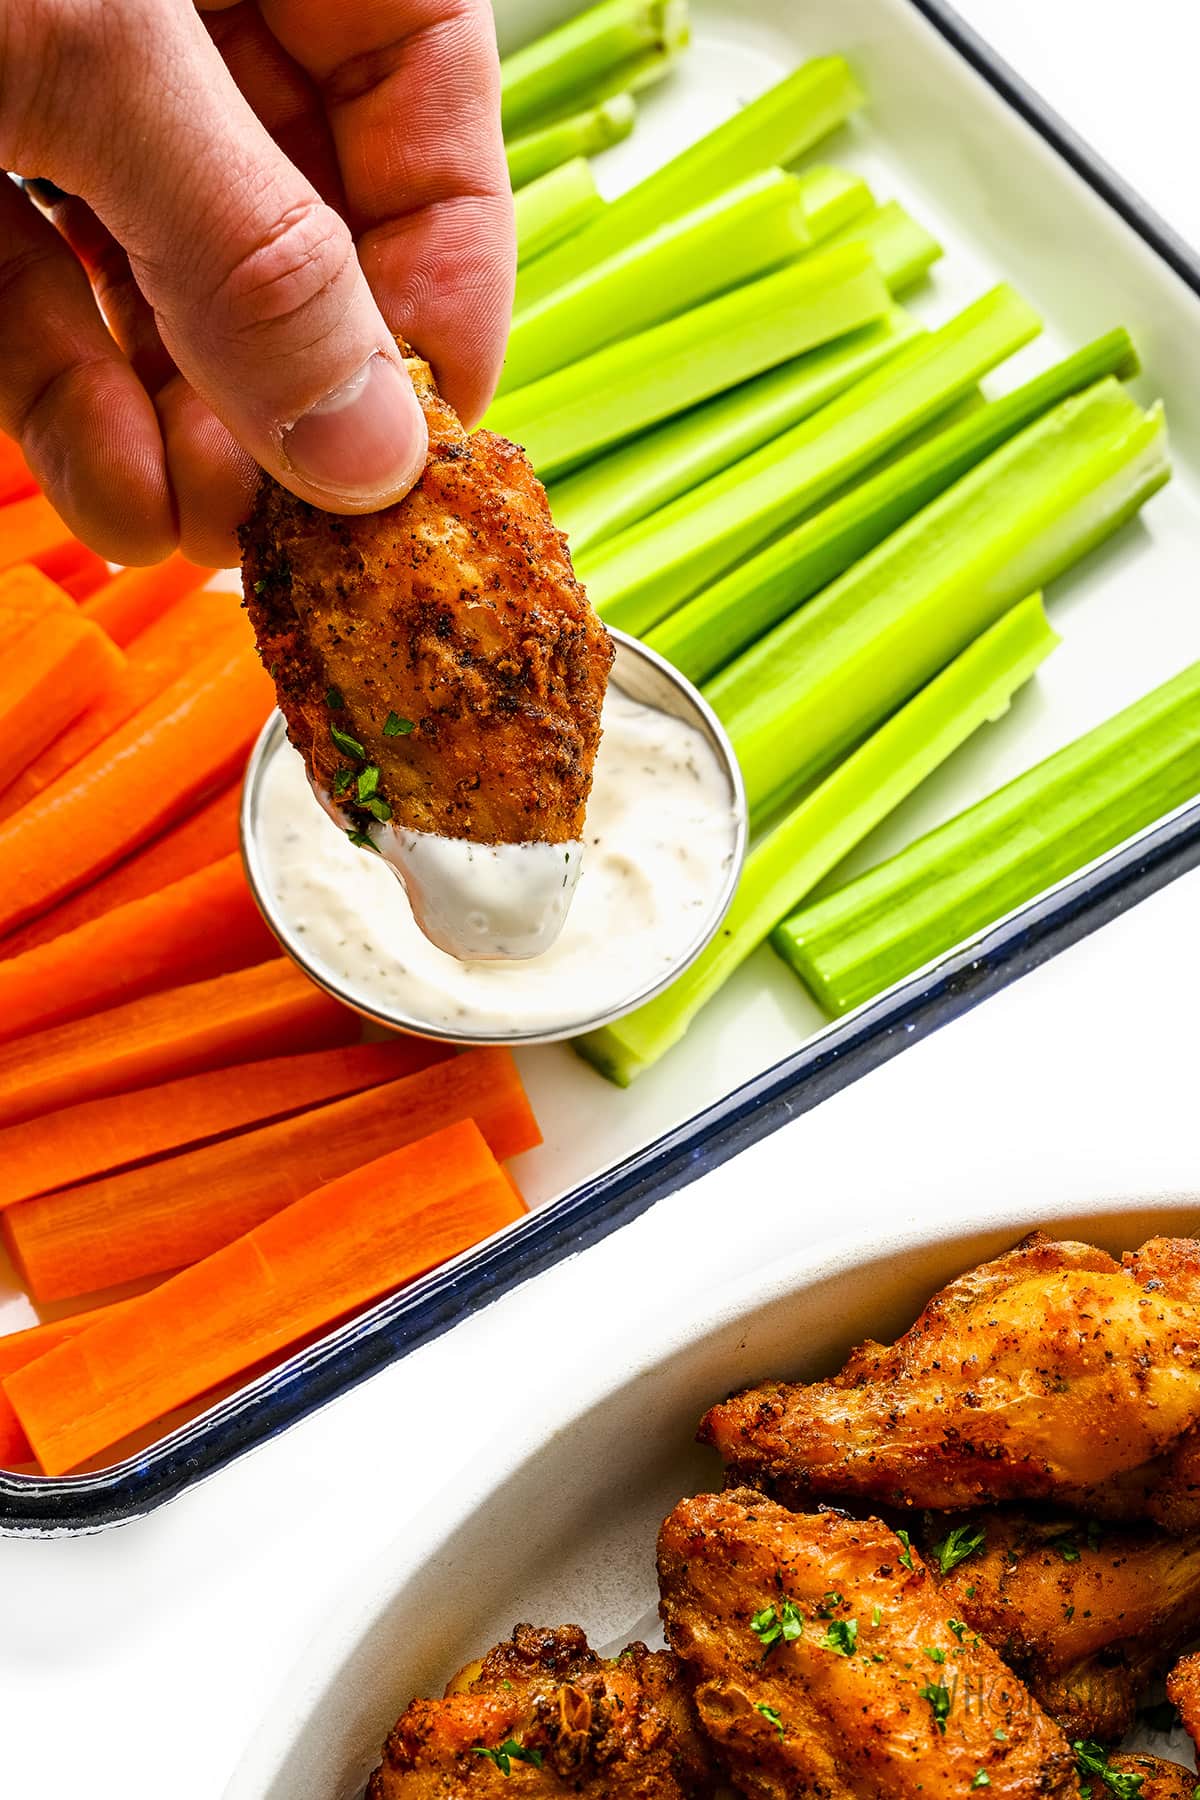 One crispy chicken wing dipped in ranch, with carrots and celery in the background.